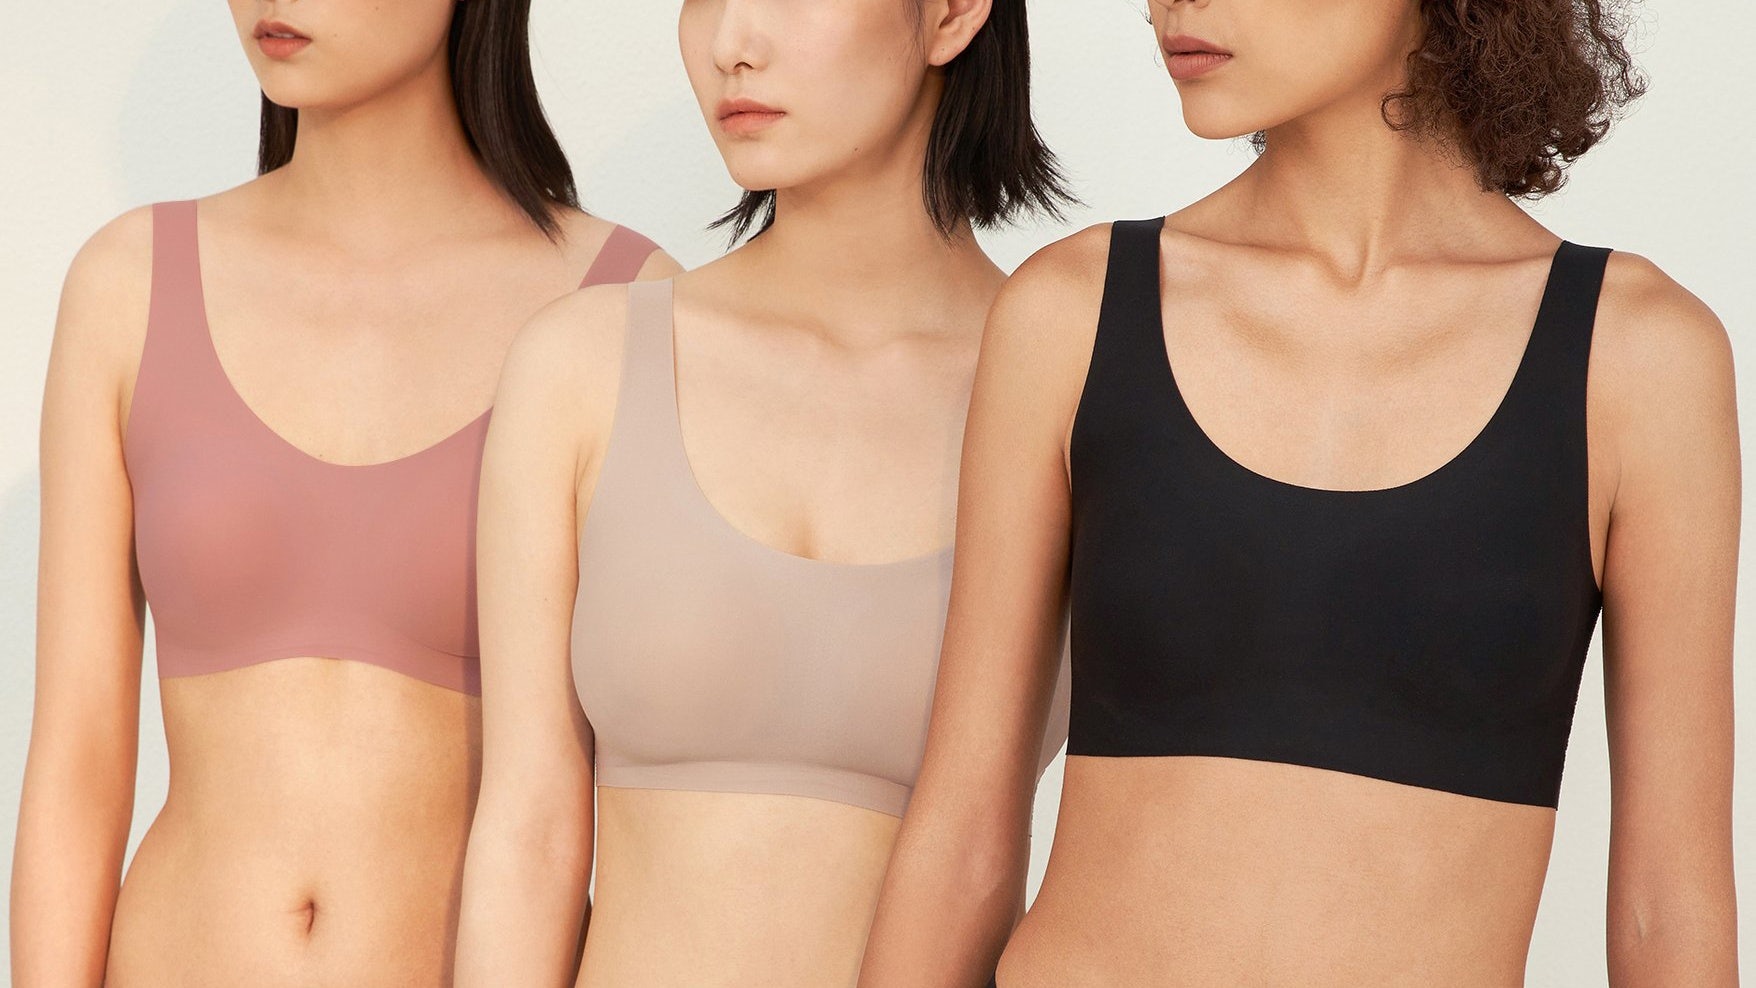 Incorrect sizing is one of the leading reasons for returns in fashion. Jing Daily tackles how brands can get Chinese consumers their correct sizes. Photo: Courtesy of Neiwai